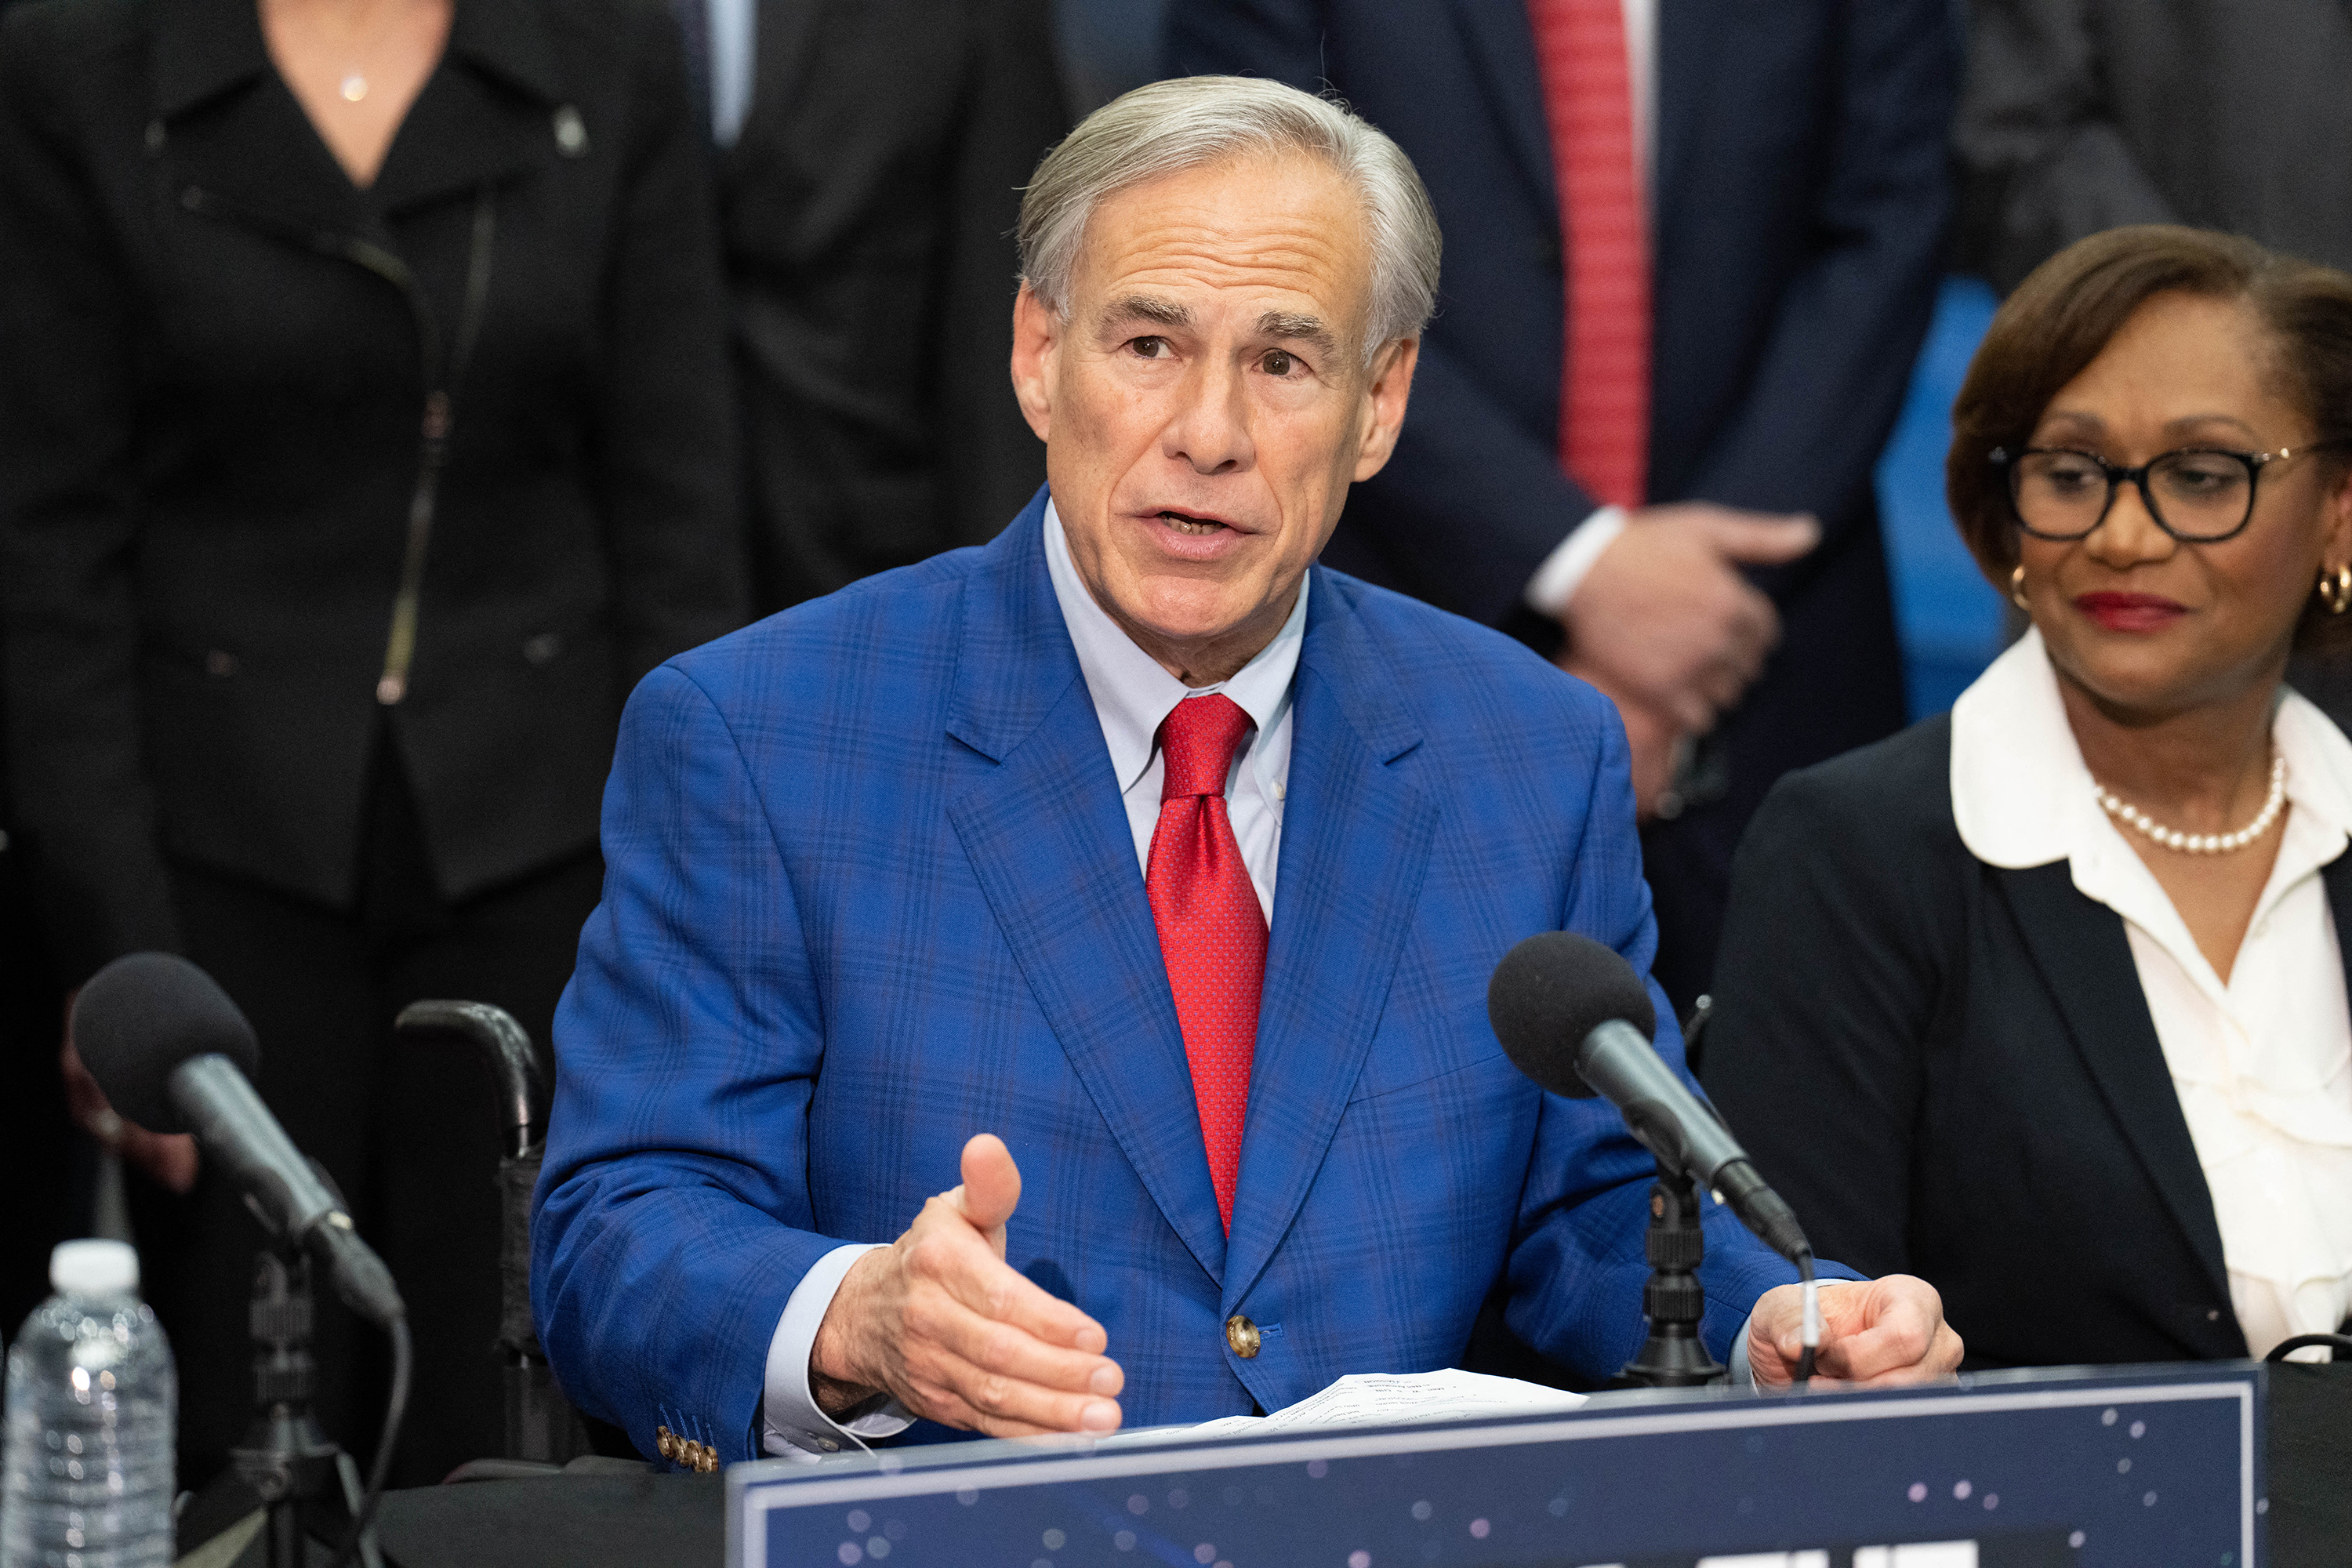 Texas Governor Greg Abbott makes an announcement on the future of the space industry in Texas, at NASA's Johnson Space Center in Houston, Texas, on March 26.